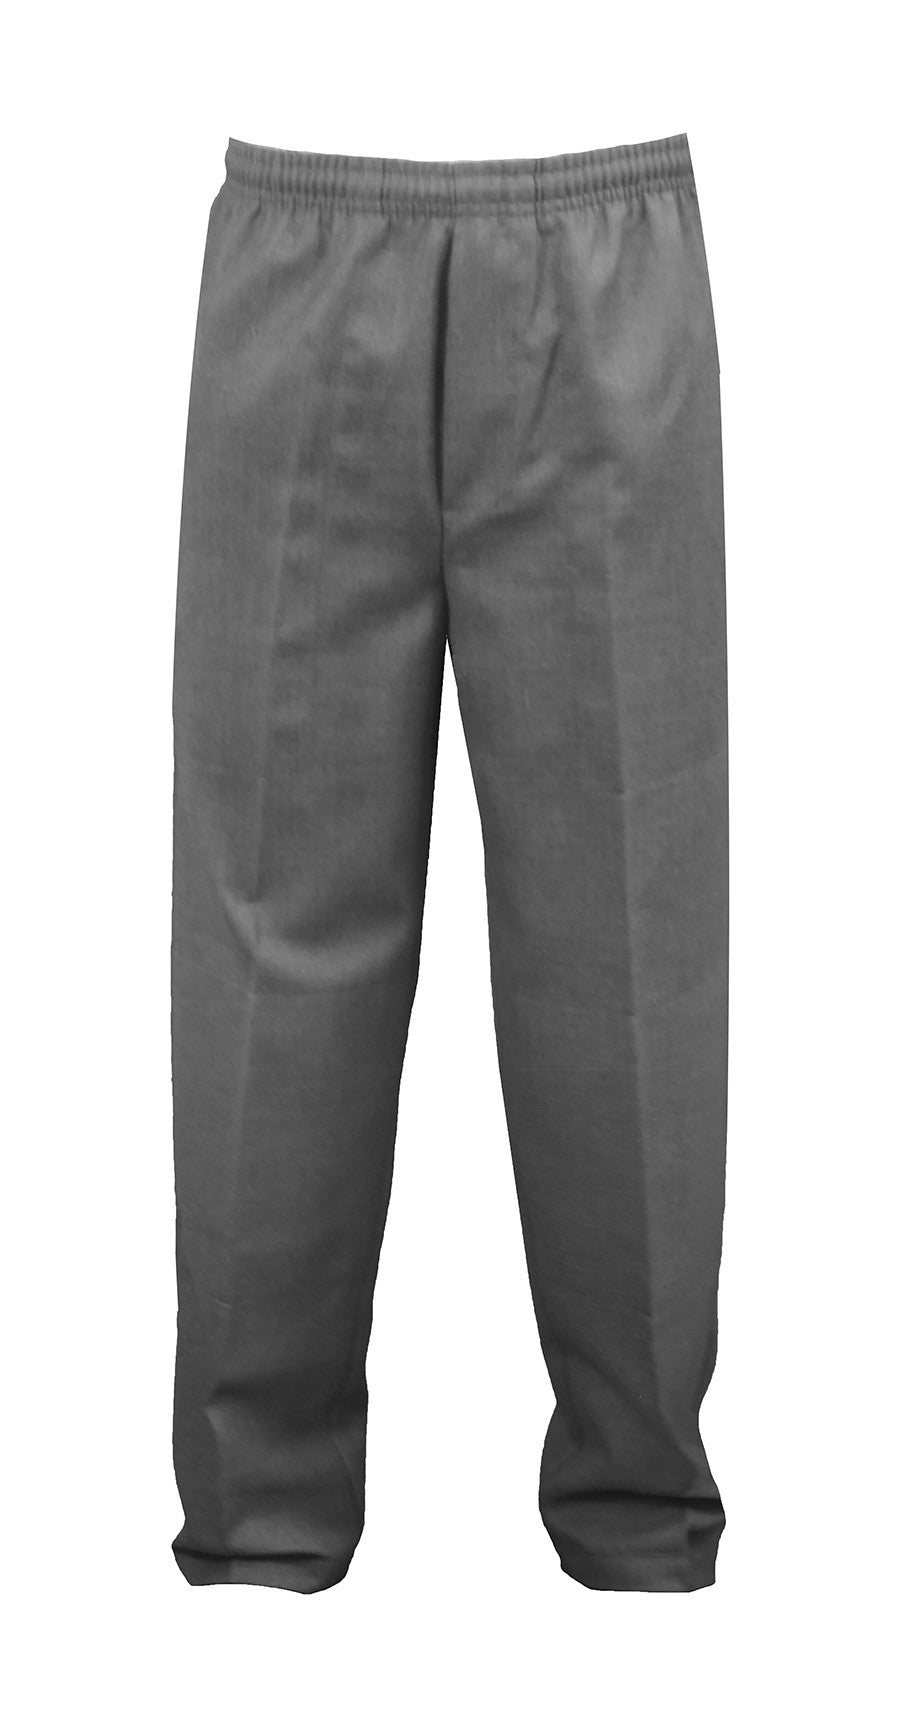 GREY RUGBY PANTS, POLY/VISCOSE, YOUTH